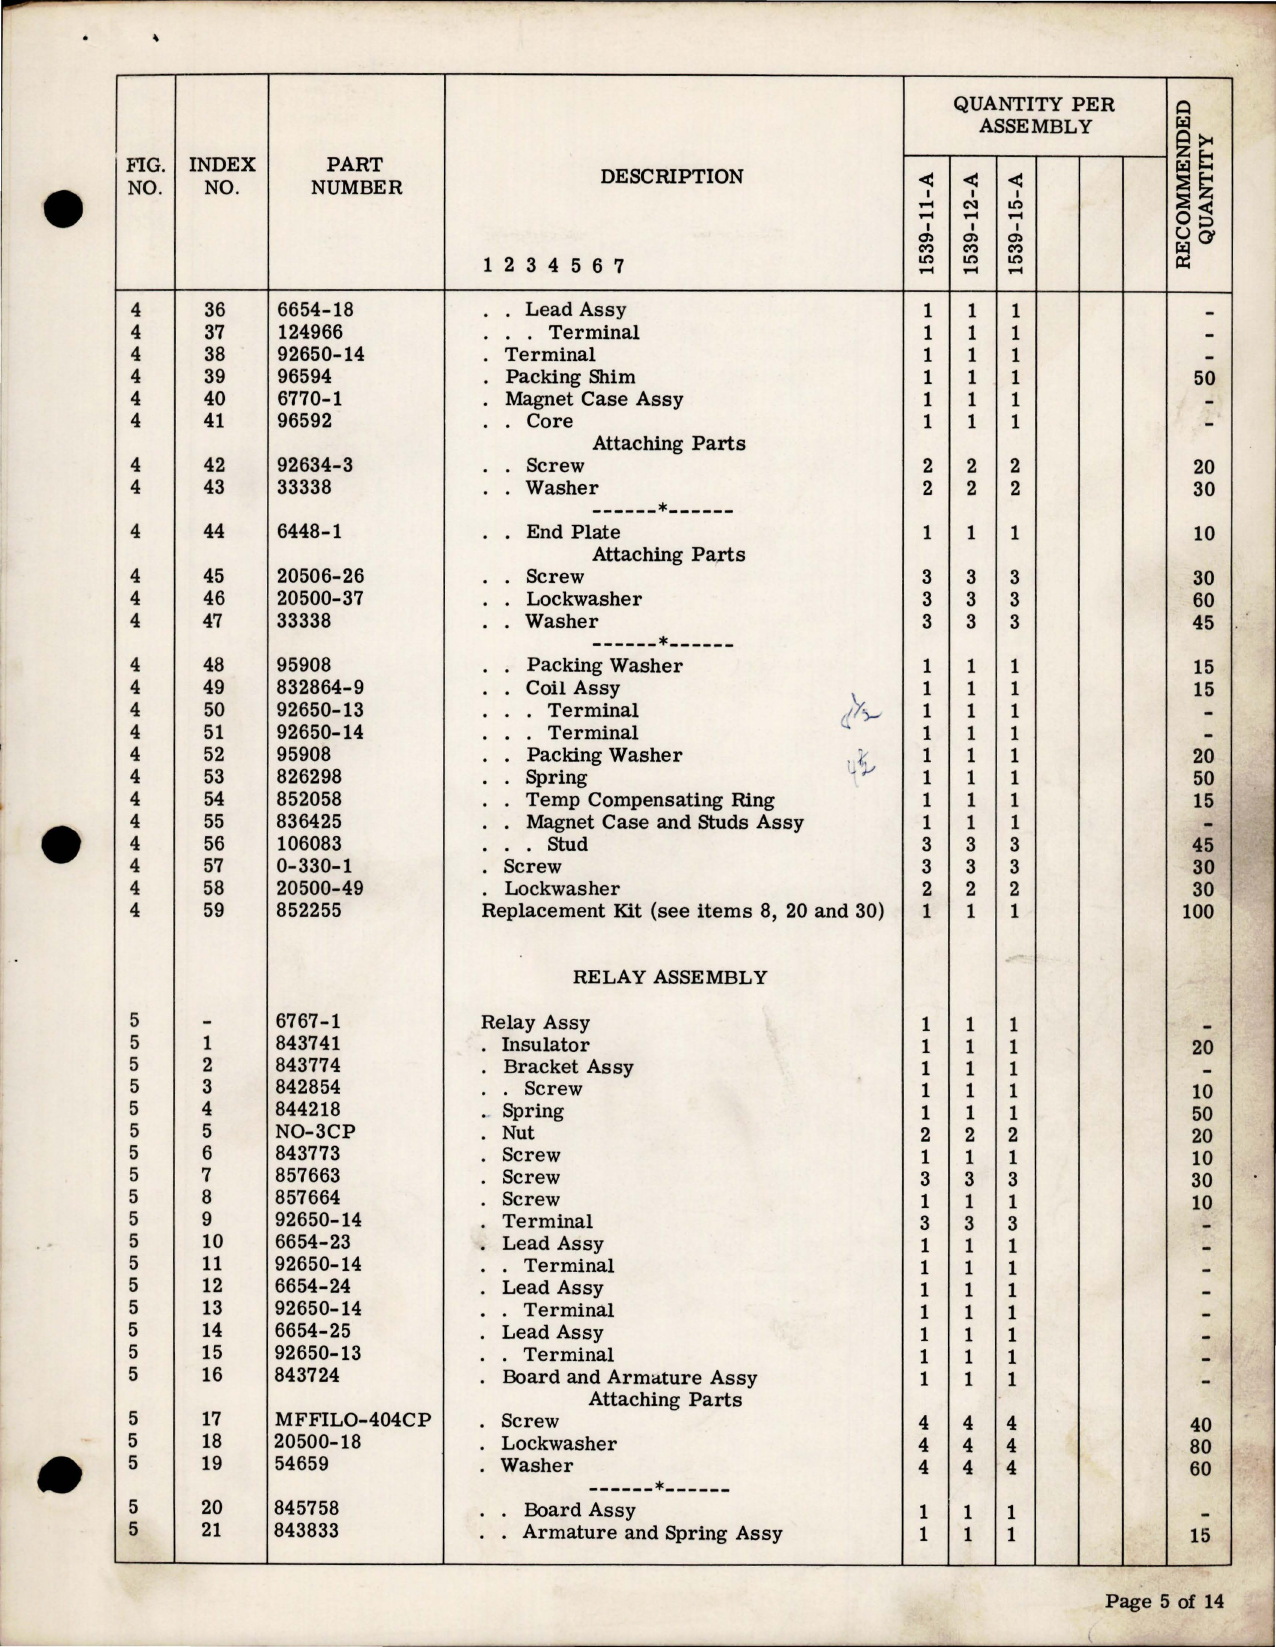 Sample page 5 from AirCorps Library document: Service Parts List for Generator Control Panel - 1539-11-A, 1539-12-A and 1539-15-A 